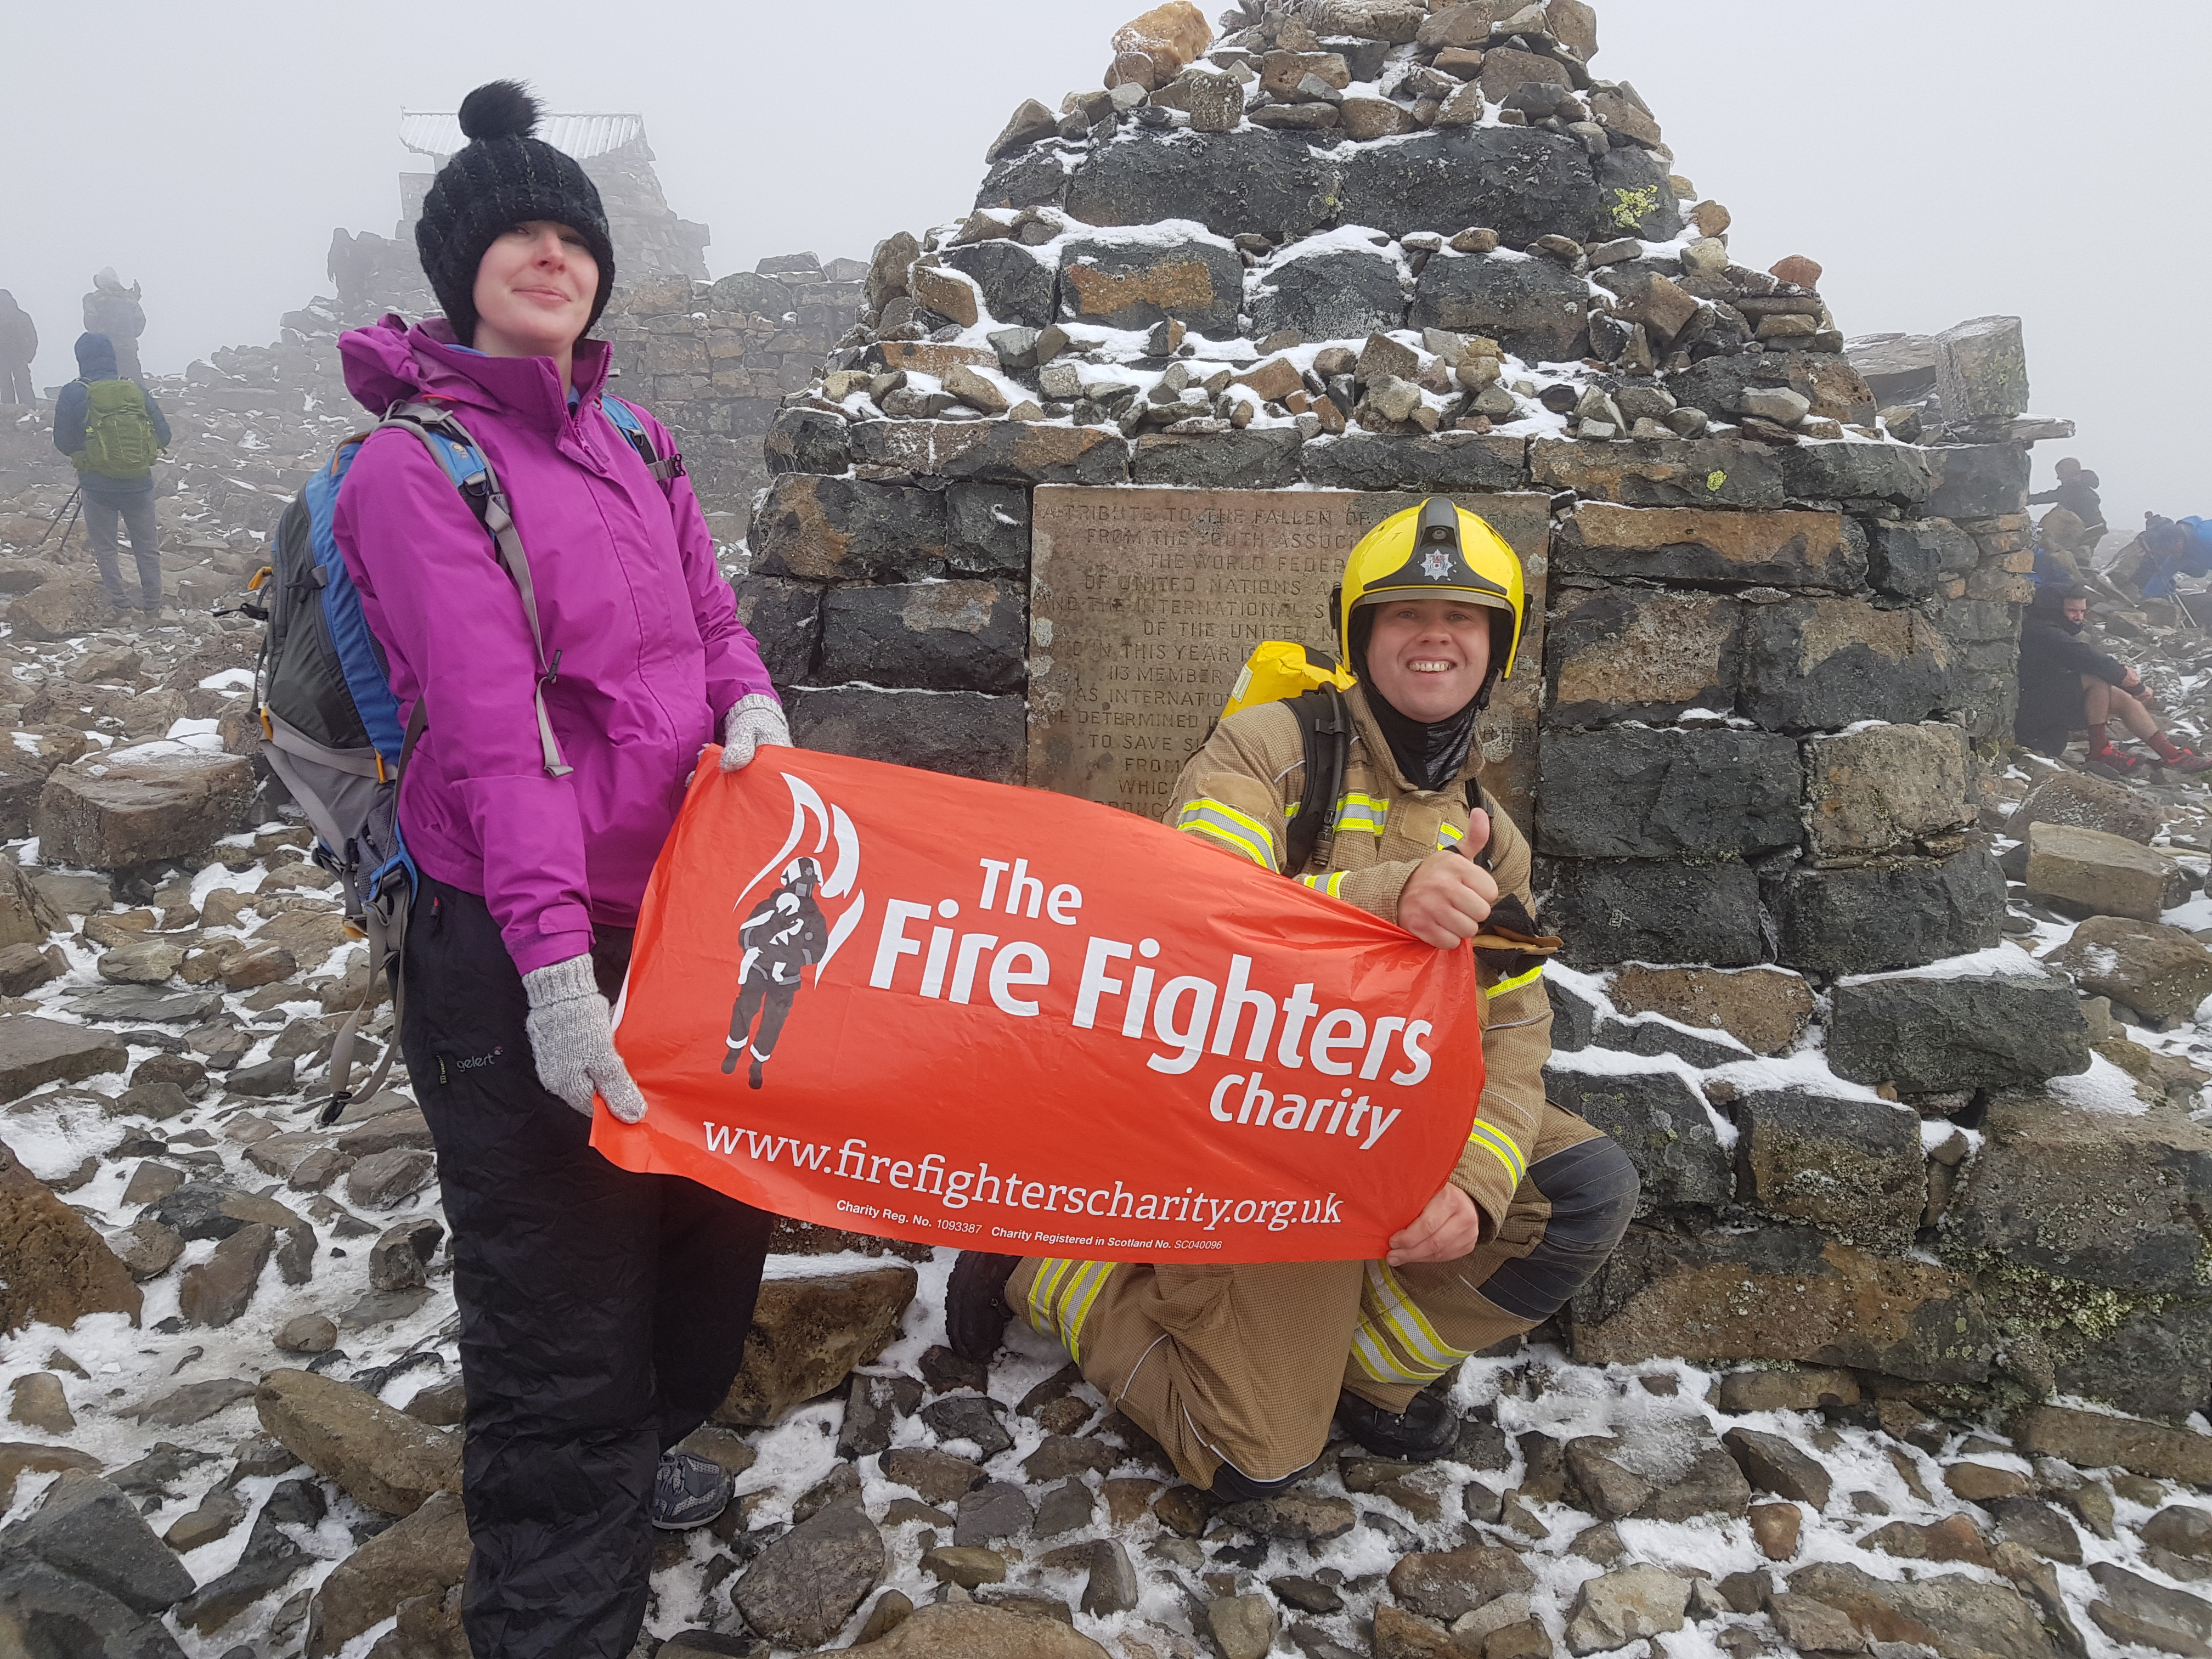 Phil and Michelle Radwell holding a Fire Fighters Charity poster